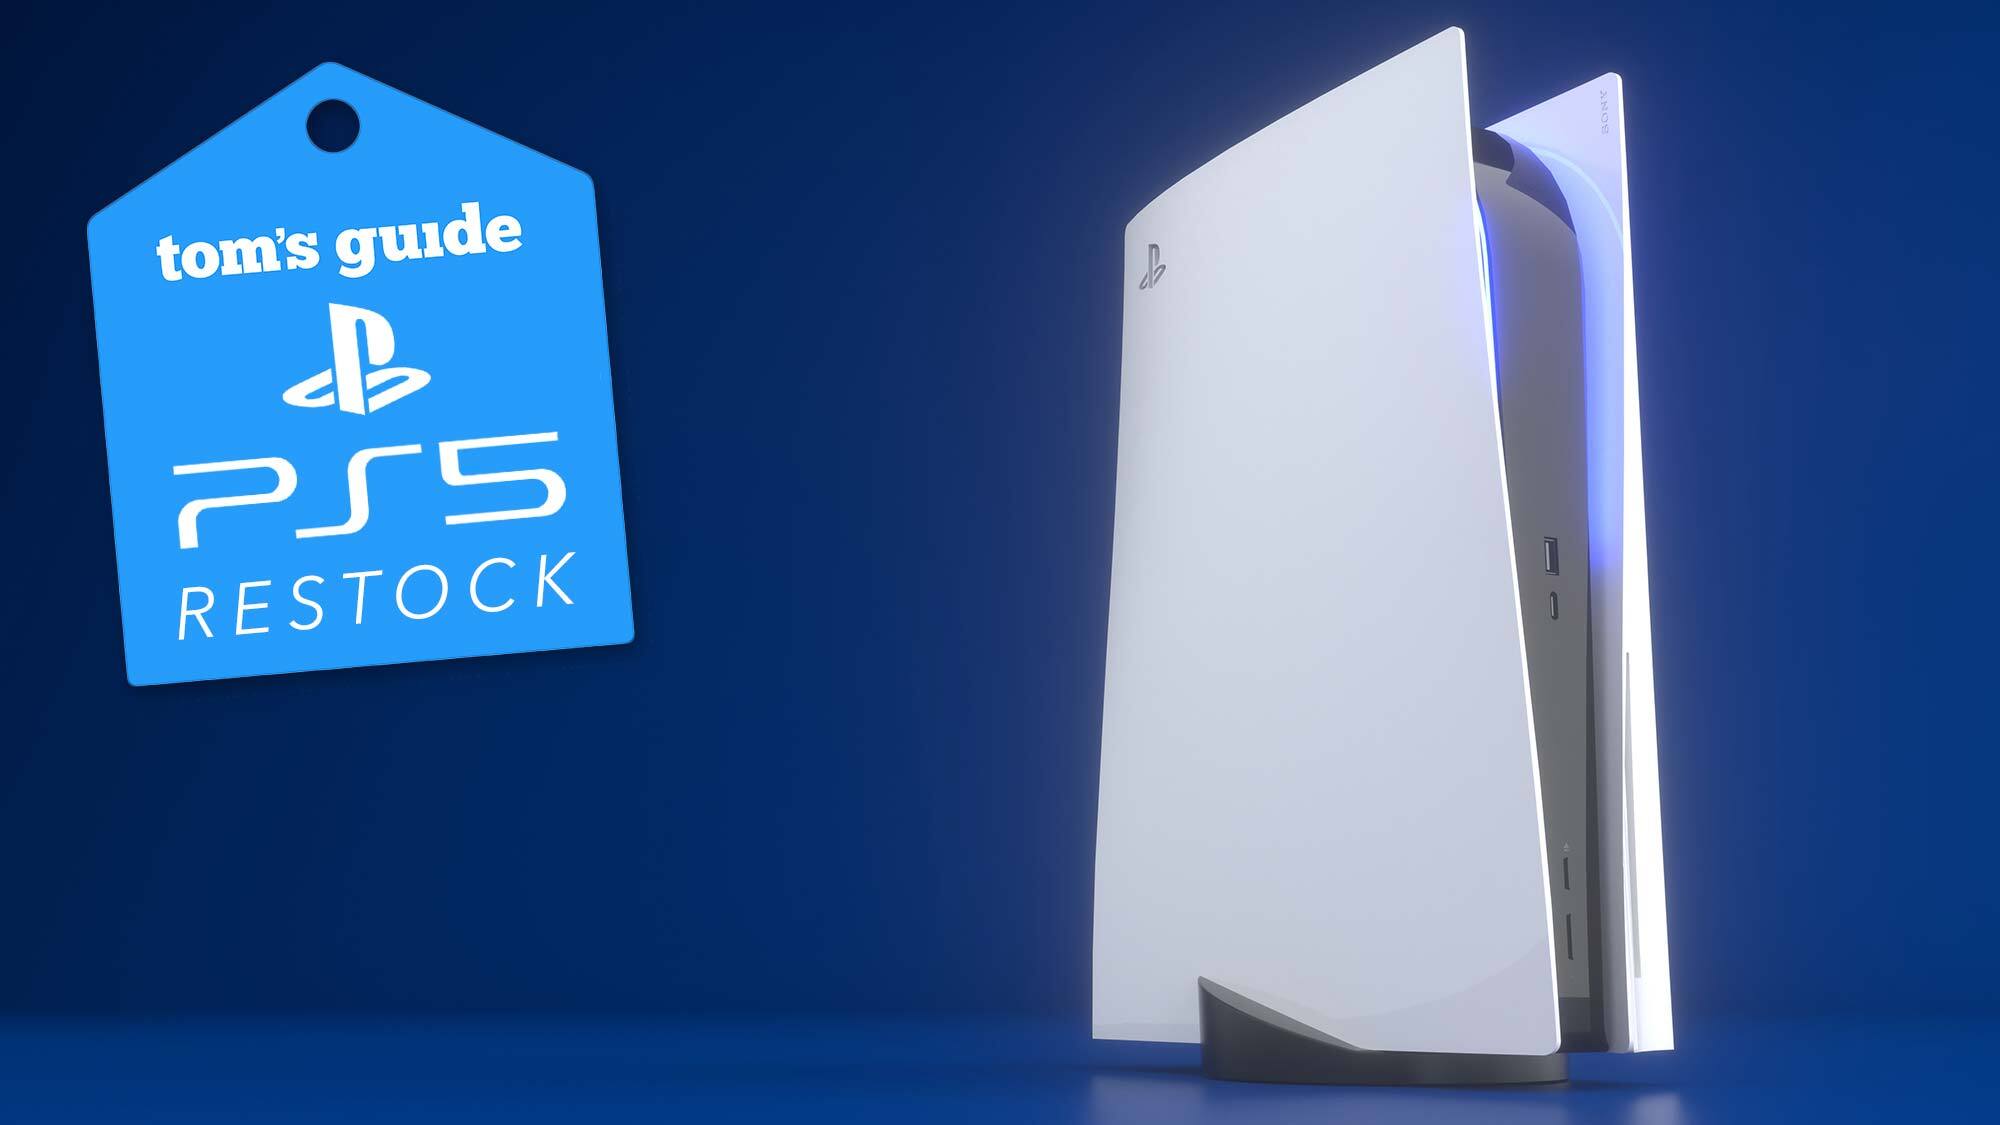 Sony Direct PS5 restock sold out — where to find stock next